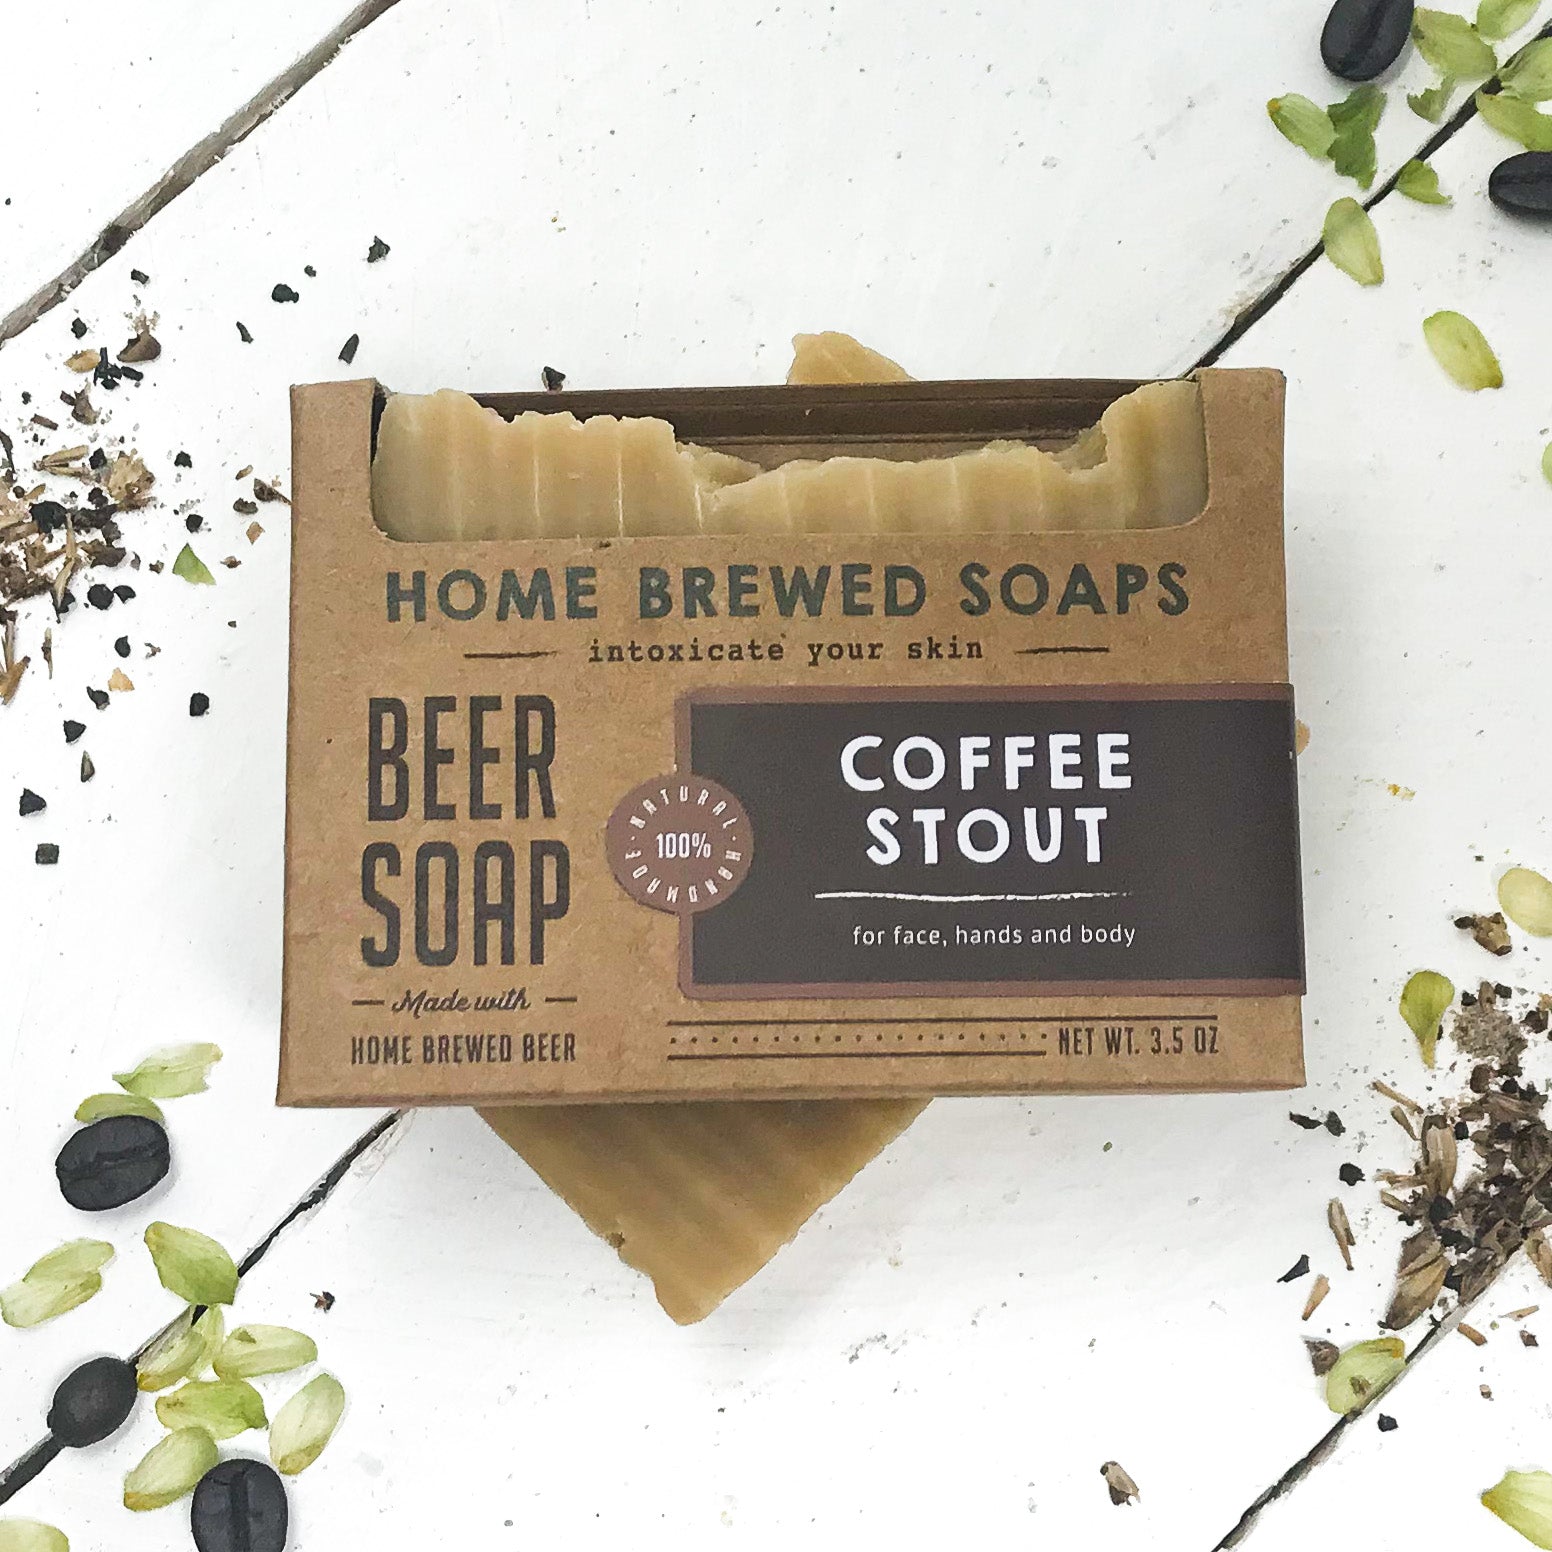 Beer Soap - Coffee Stout - Coffee Soap - Unscented by Home Brewed Soaps